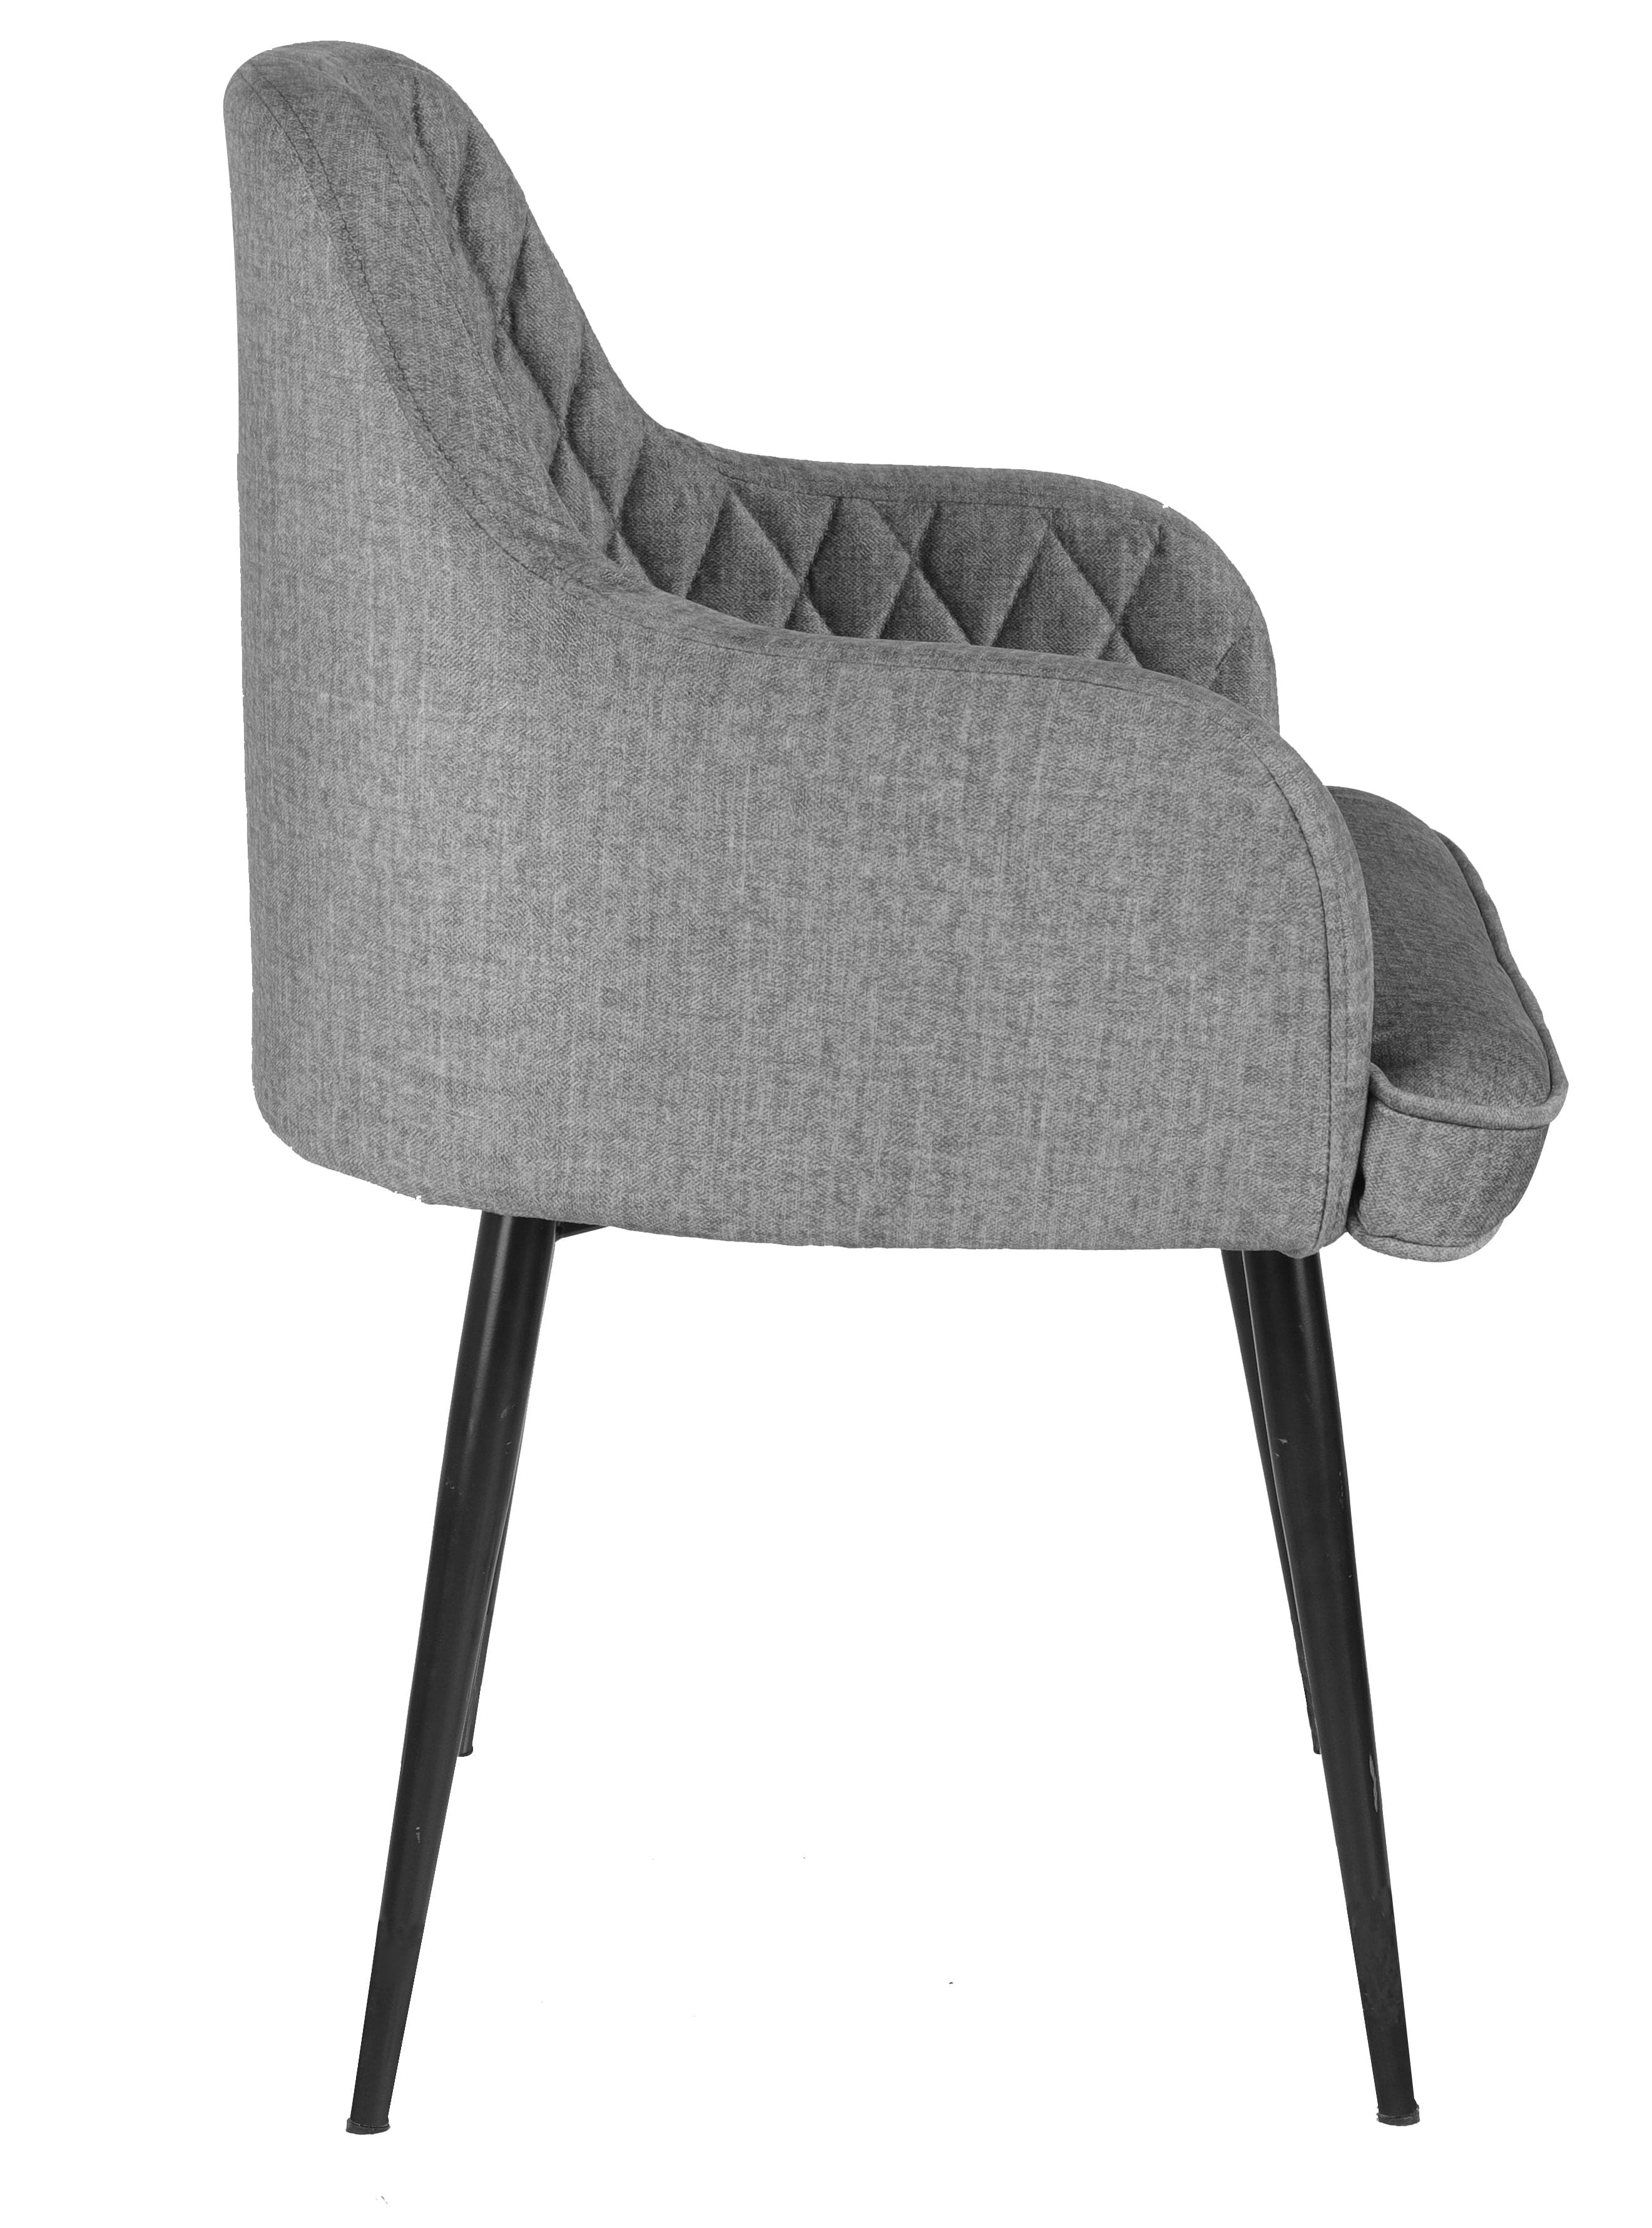 Adiko Lounge Chair Stool in Grey Color